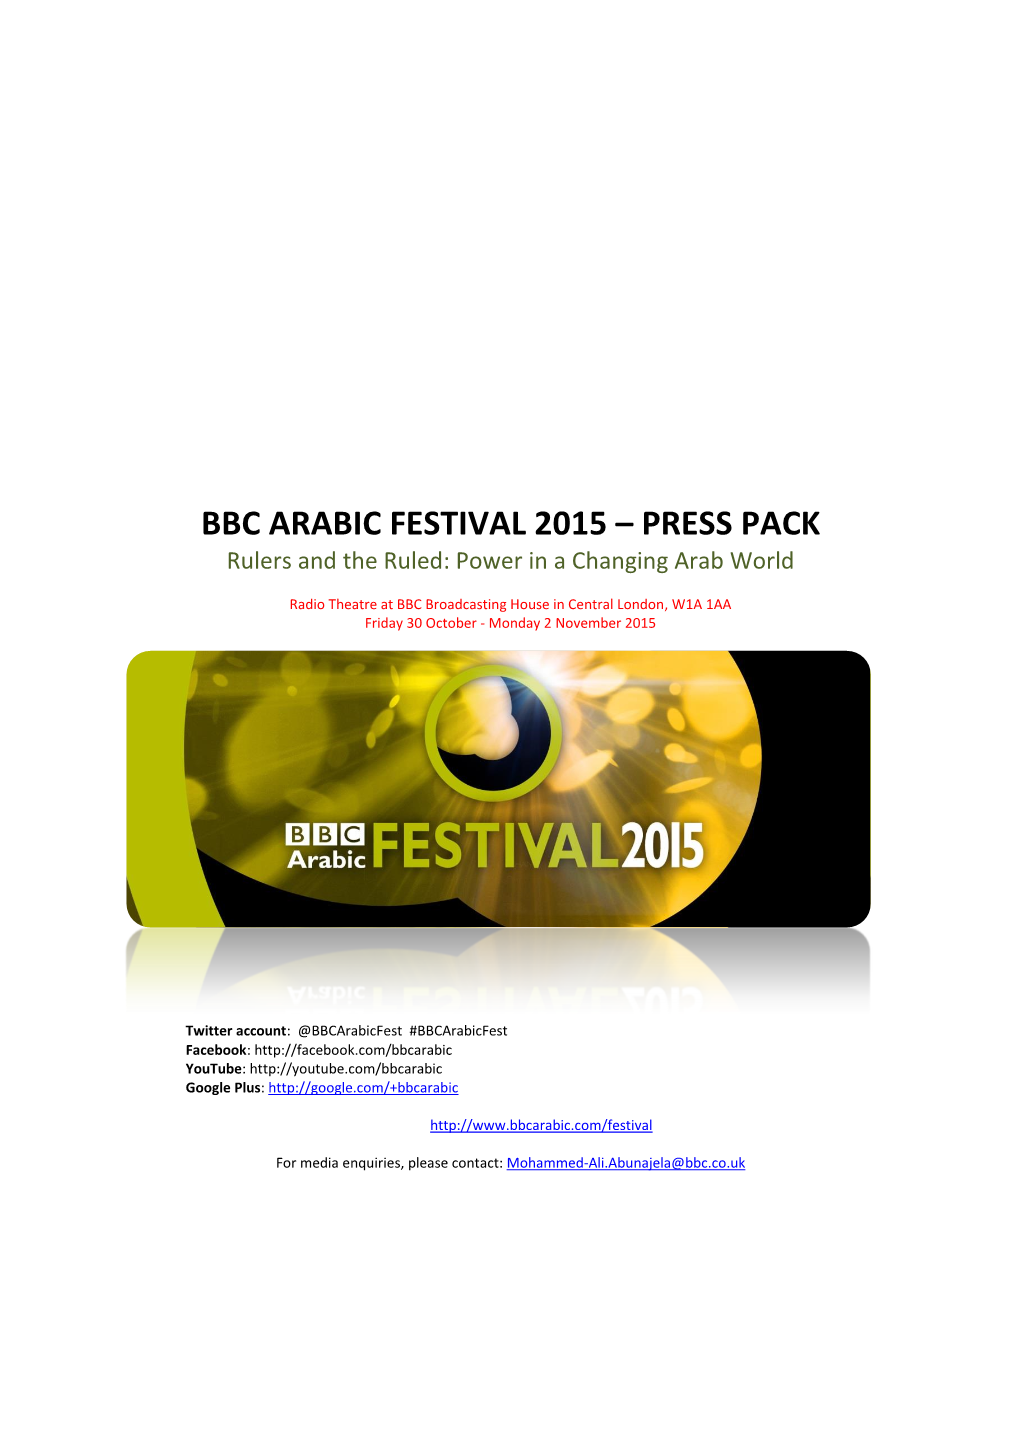 BBC ARABIC FESTIVAL 2015 – PRESS PACK Rulers and the Ruled: Power in a Changing Arab World